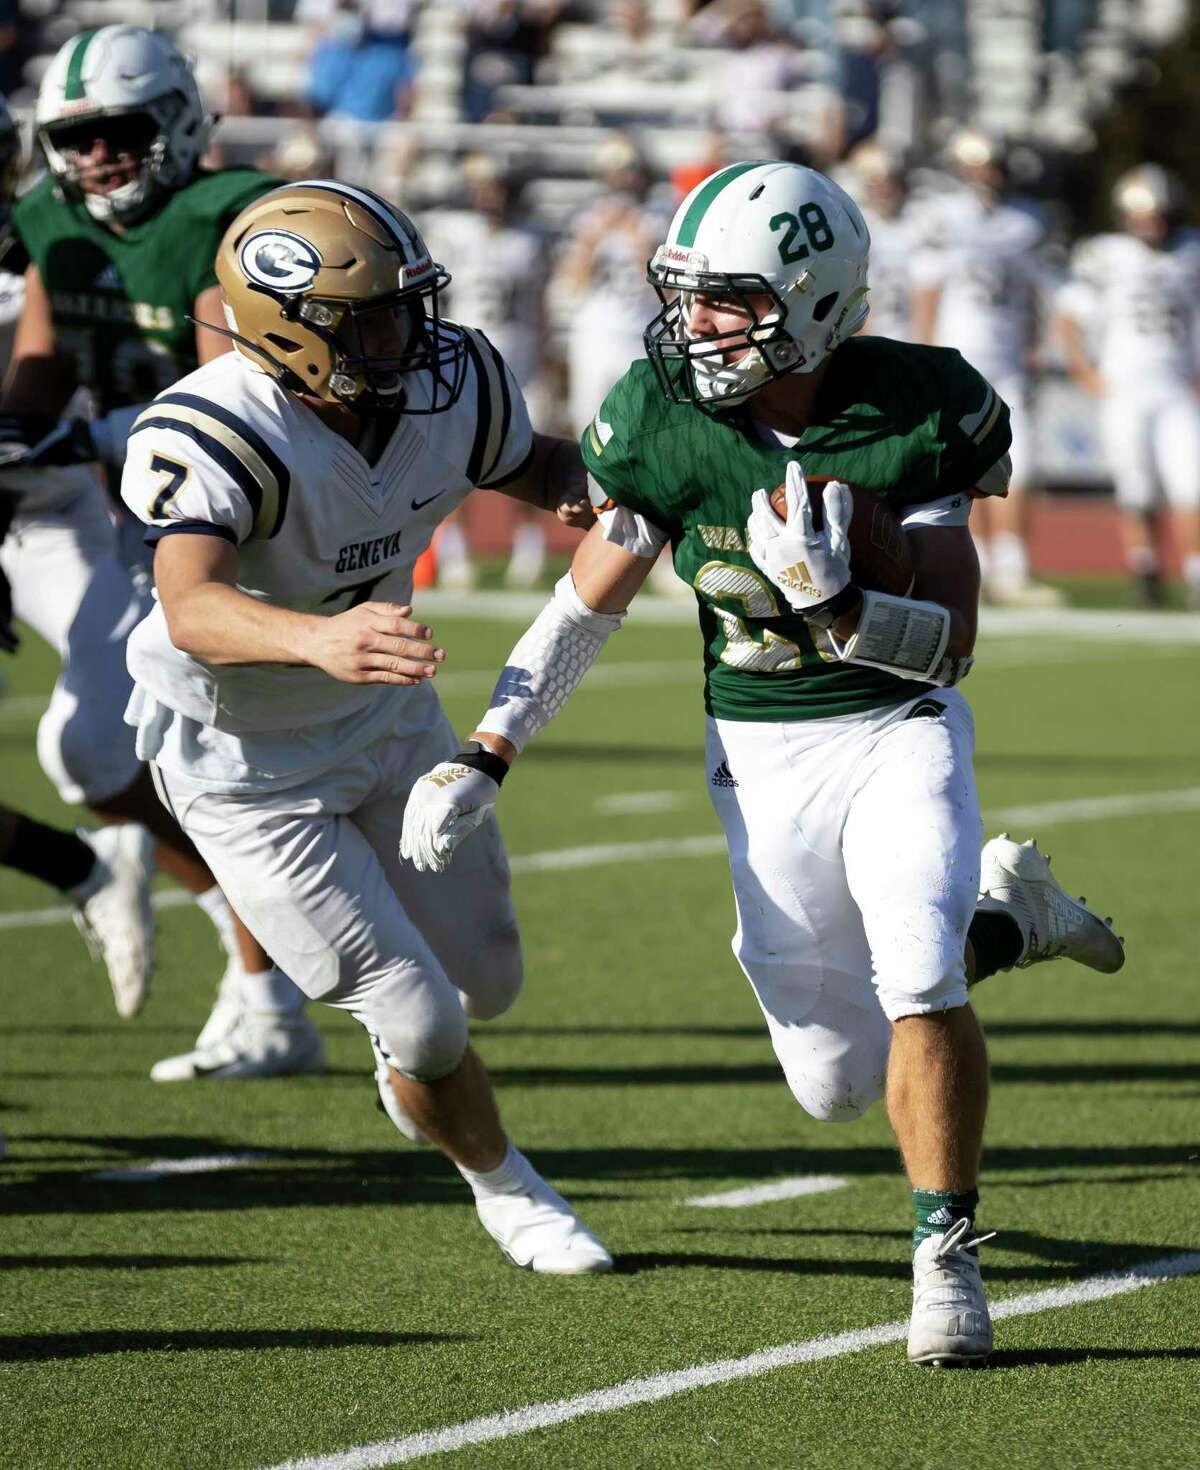 The Woodlands Christian Academy running back Ryan Leslie (28) rushes passed Boerne Geneva defensive end Jayden McCammon (7) during the first quarter of a TAPPS Division II bi-district game at Warrior Stadium in The Woodlands, Saturday, Nov. 21, 2020.